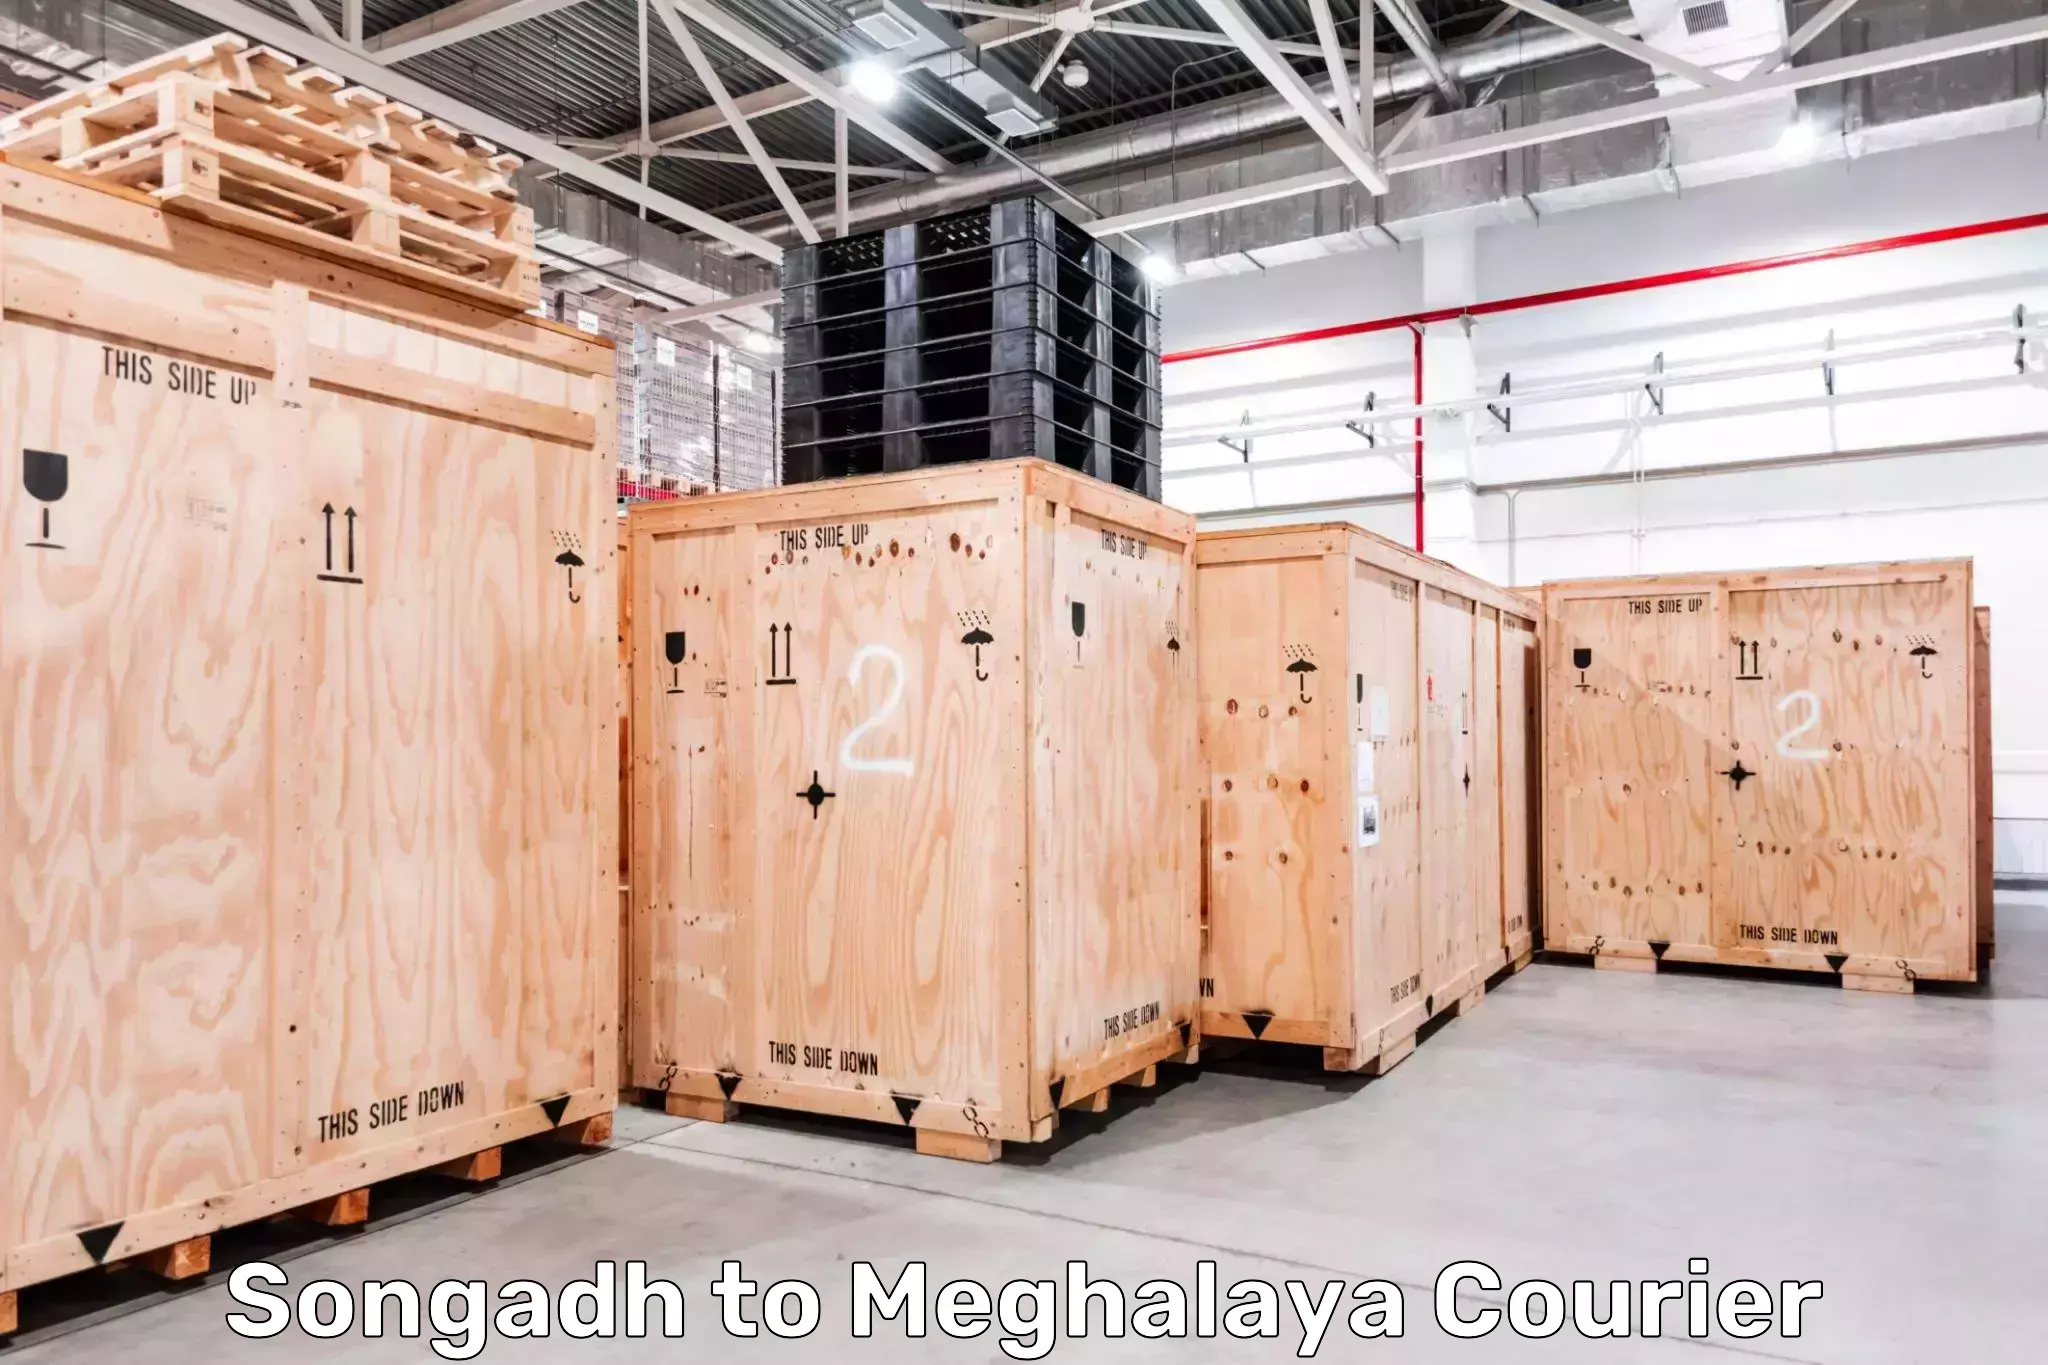 Parcel service for businesses Songadh to Meghalaya